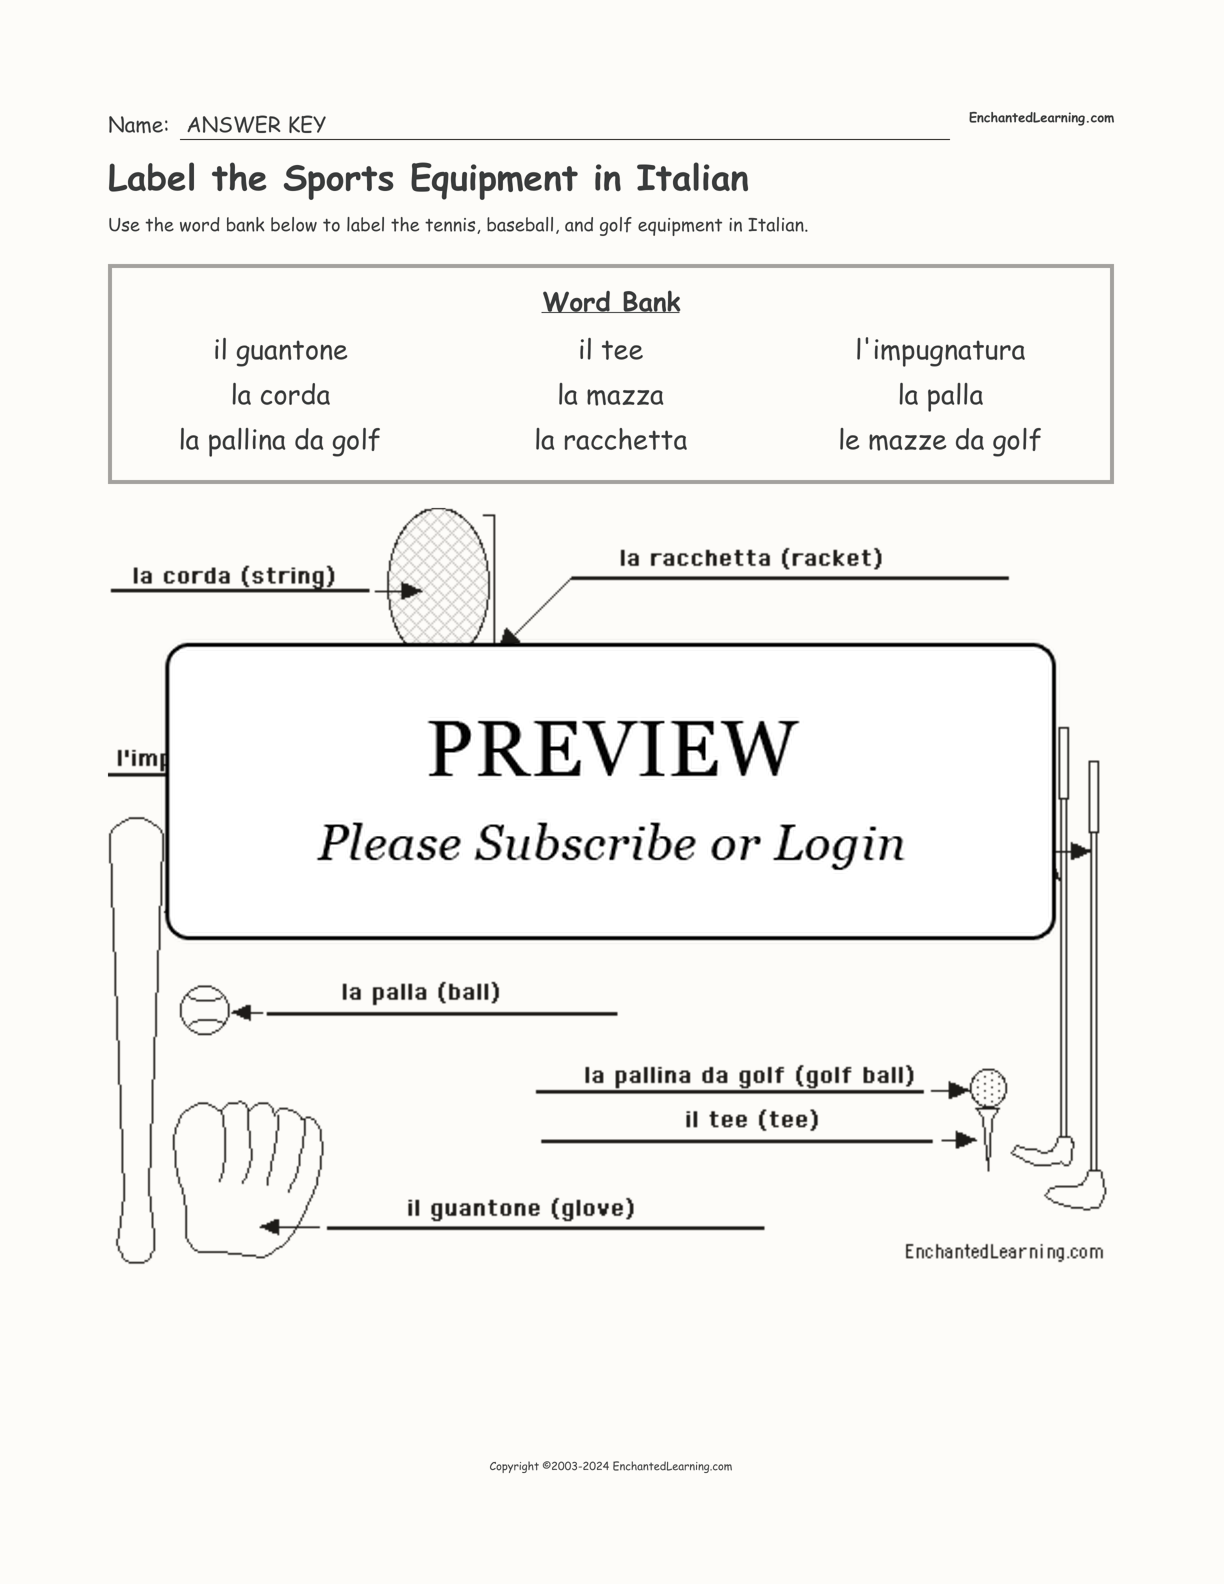 Label the Sports Equipment in Italian interactive worksheet page 2